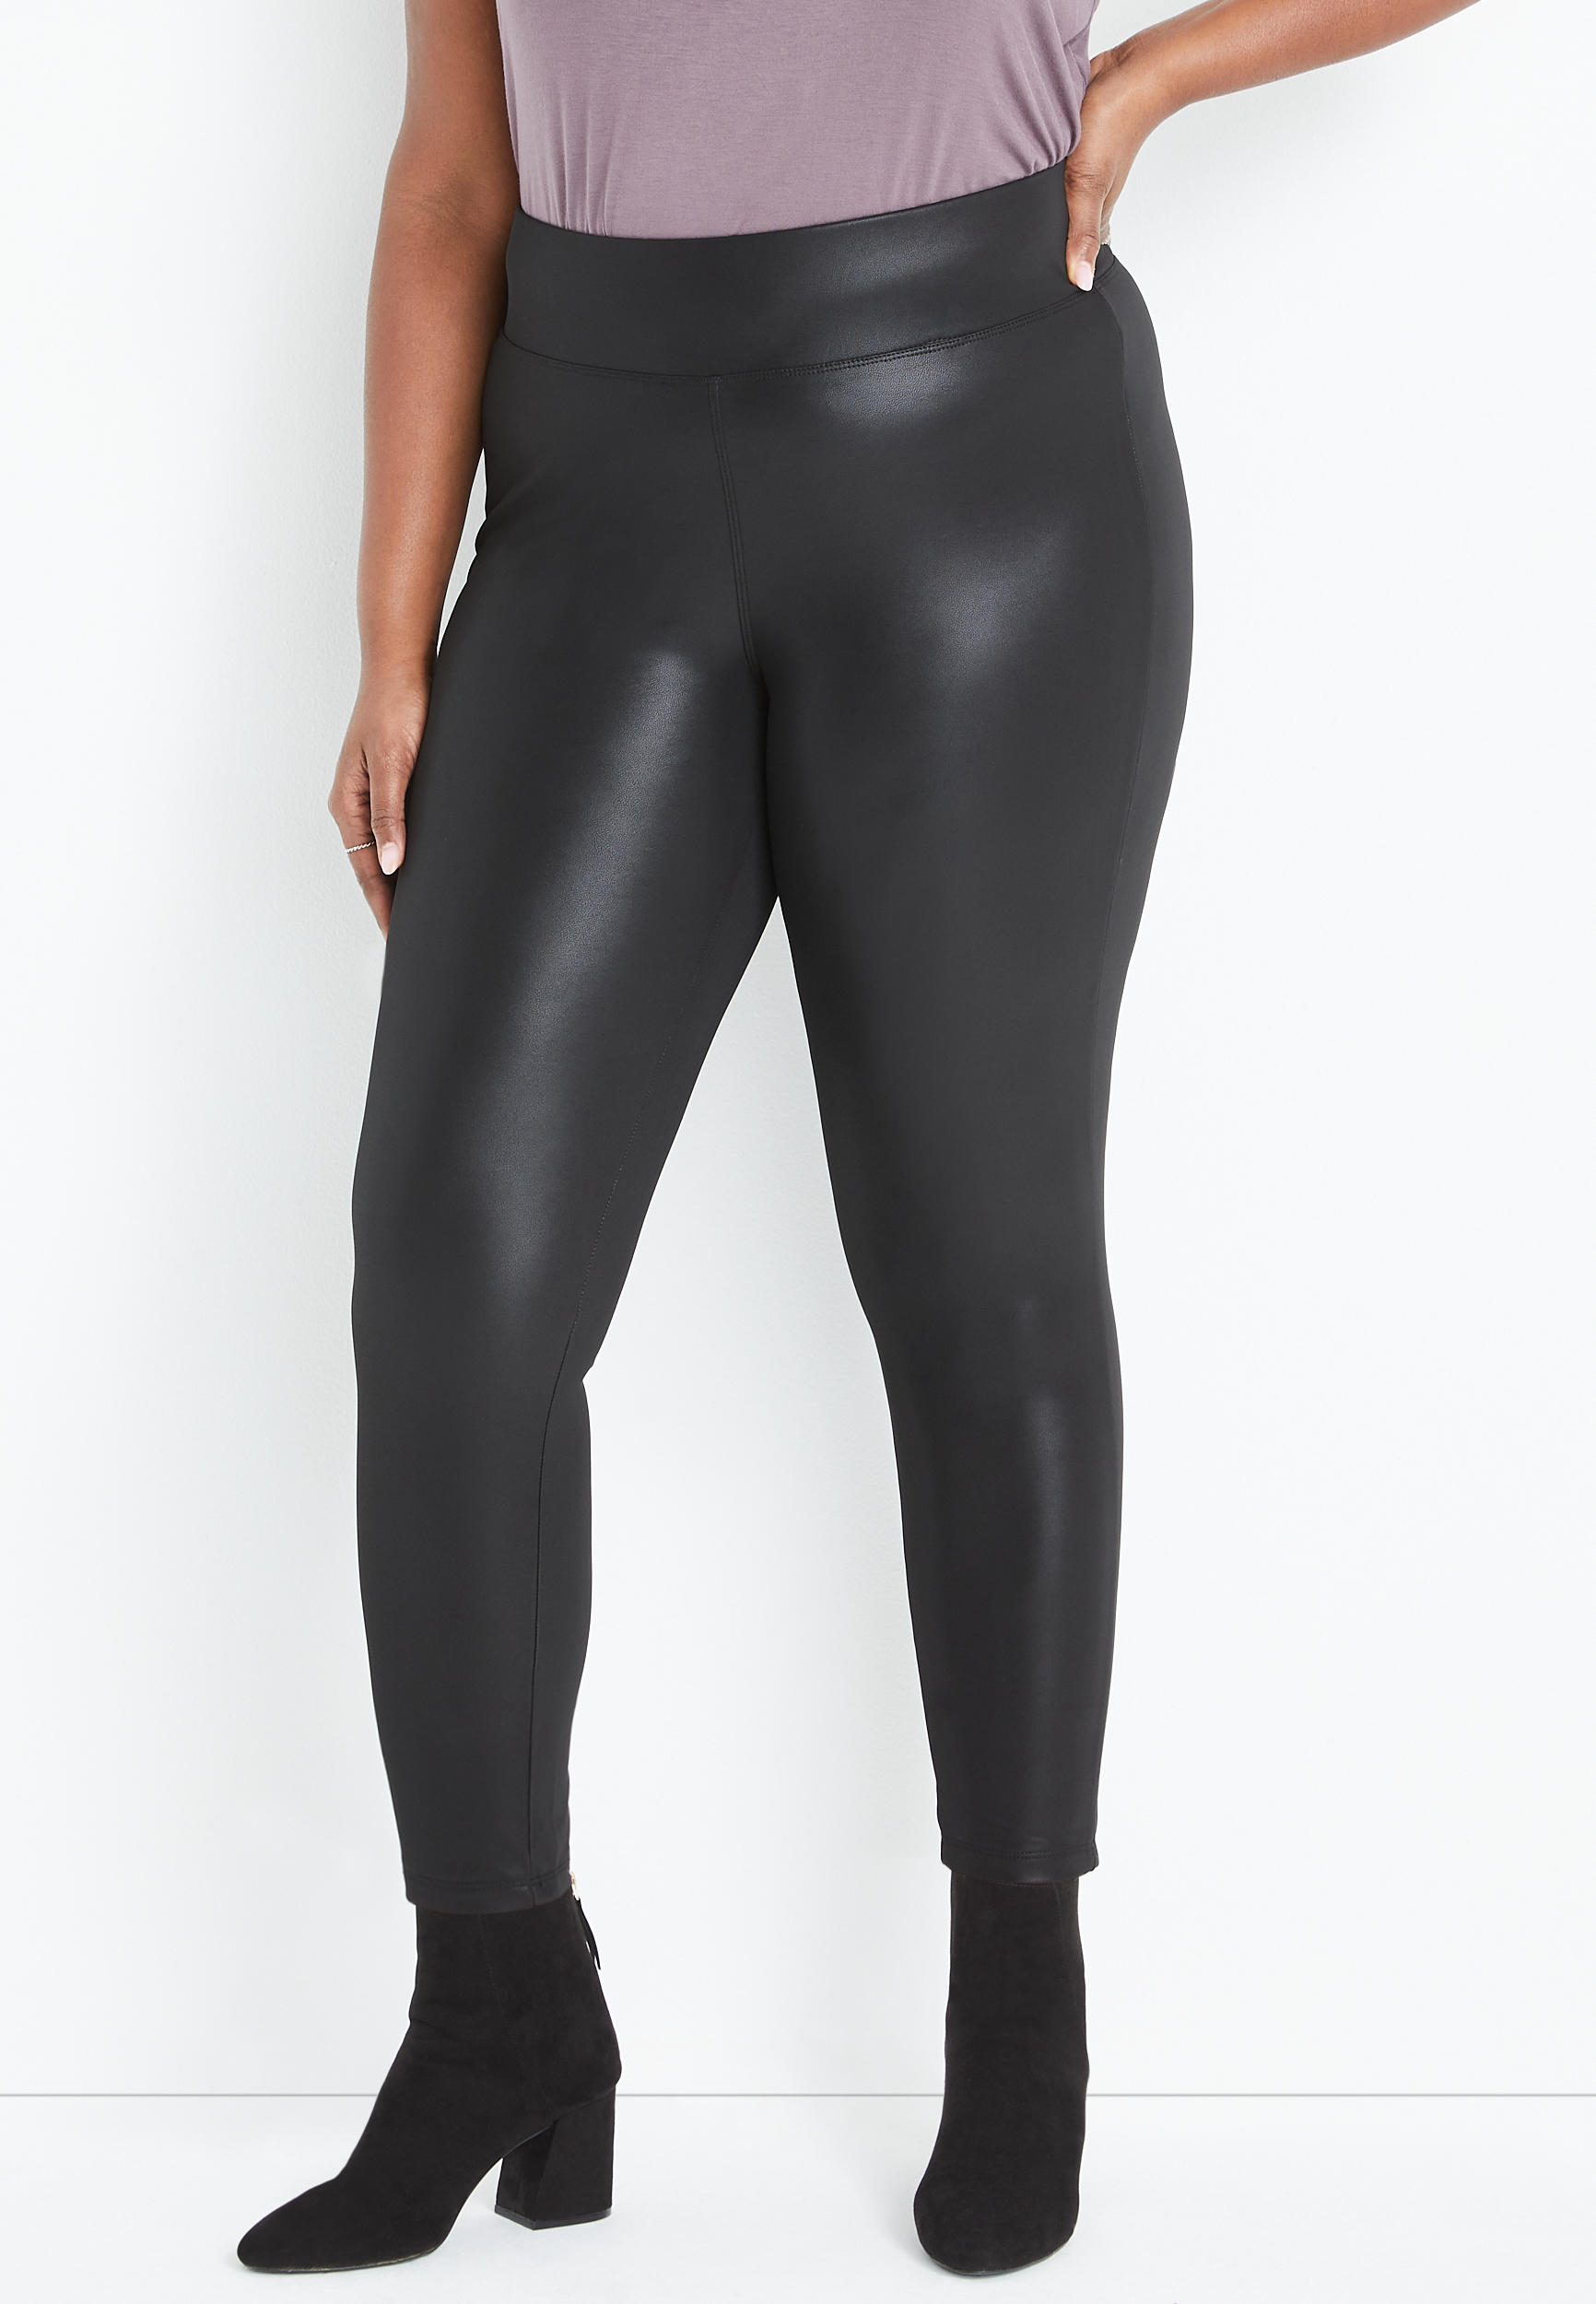 Udtale Lydighed smag Plus Size ONE5ONE™ Black Faux Leather 4-Way Stretch Legging | maurices